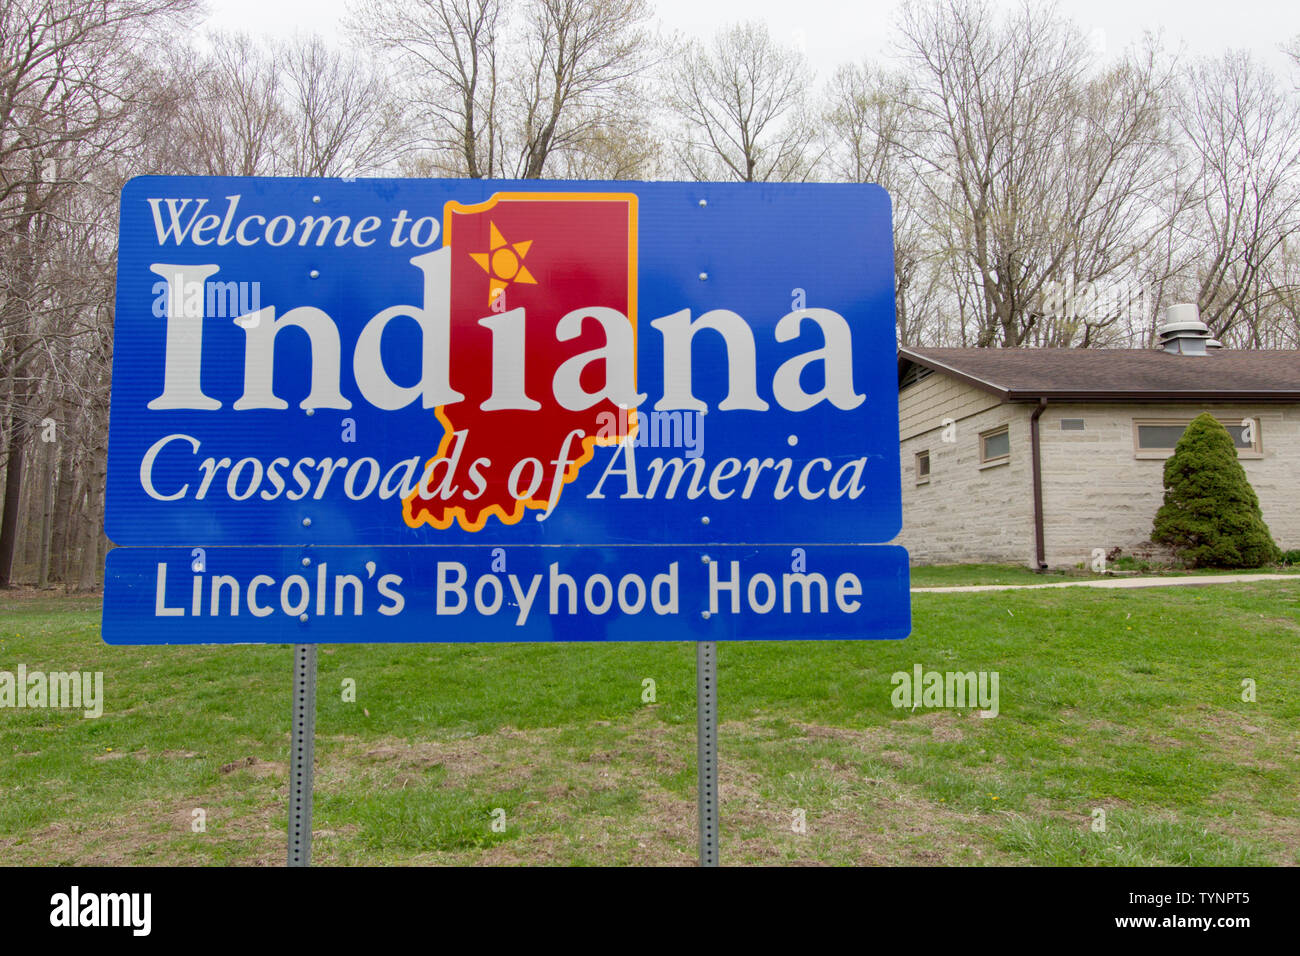 Michigan City, Indiana, USA - April 25, 2019: Indiana welcome sign at a rest area along Interstate 94 outside of Michigan City, Indiana. Stock Photo